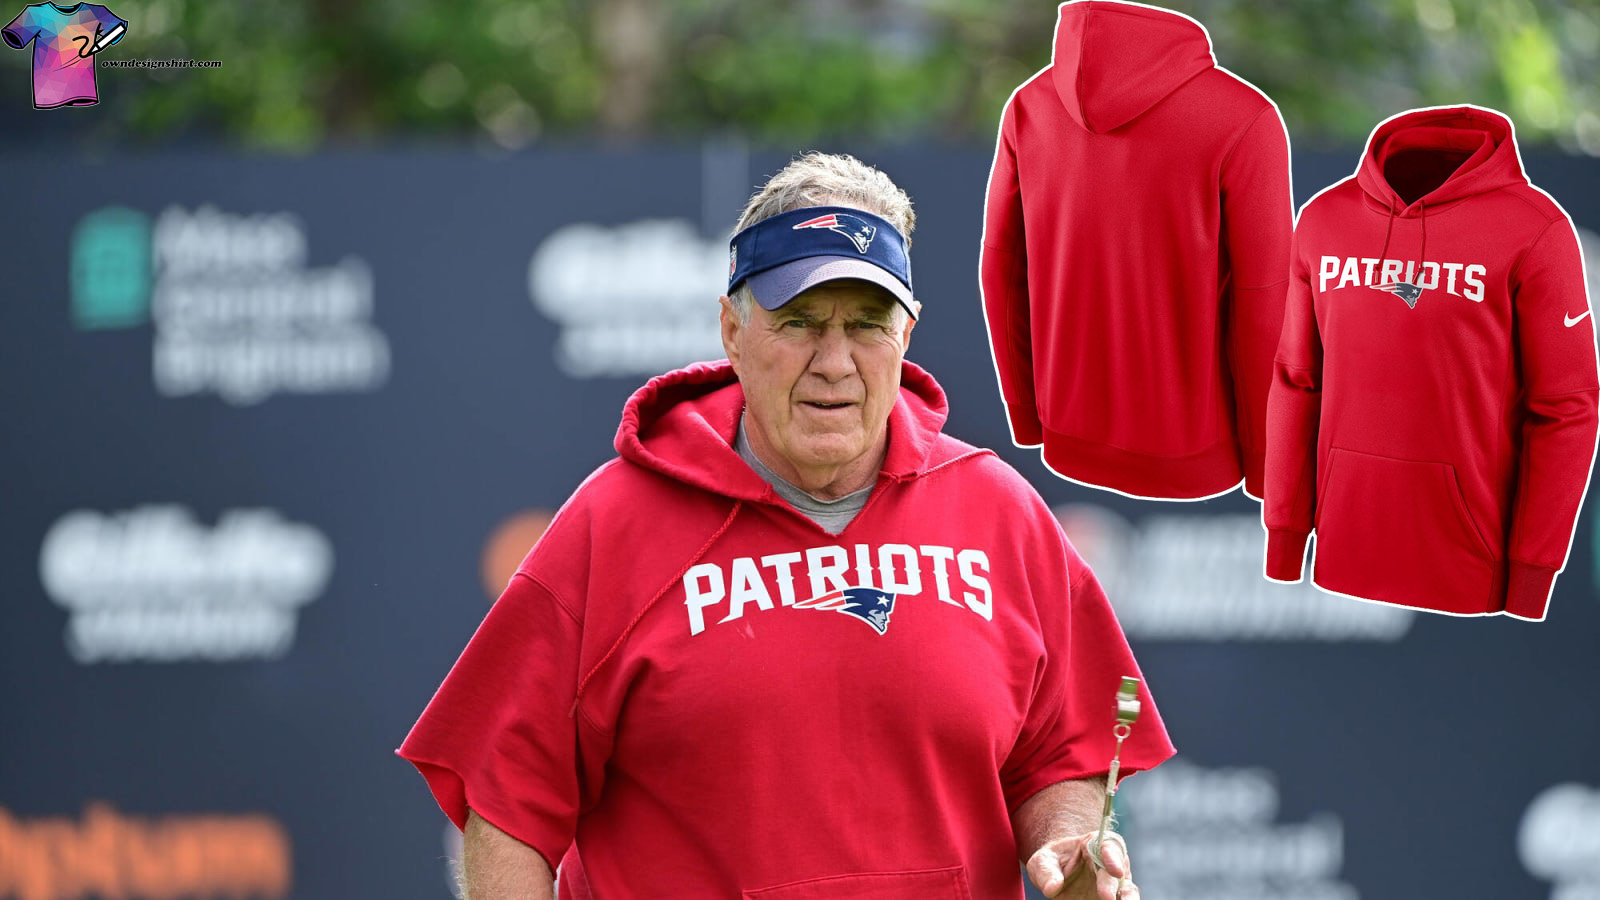 The Red Hoodie Genius Bill Belichick and the New England Patriots' Iconic Wardrobe